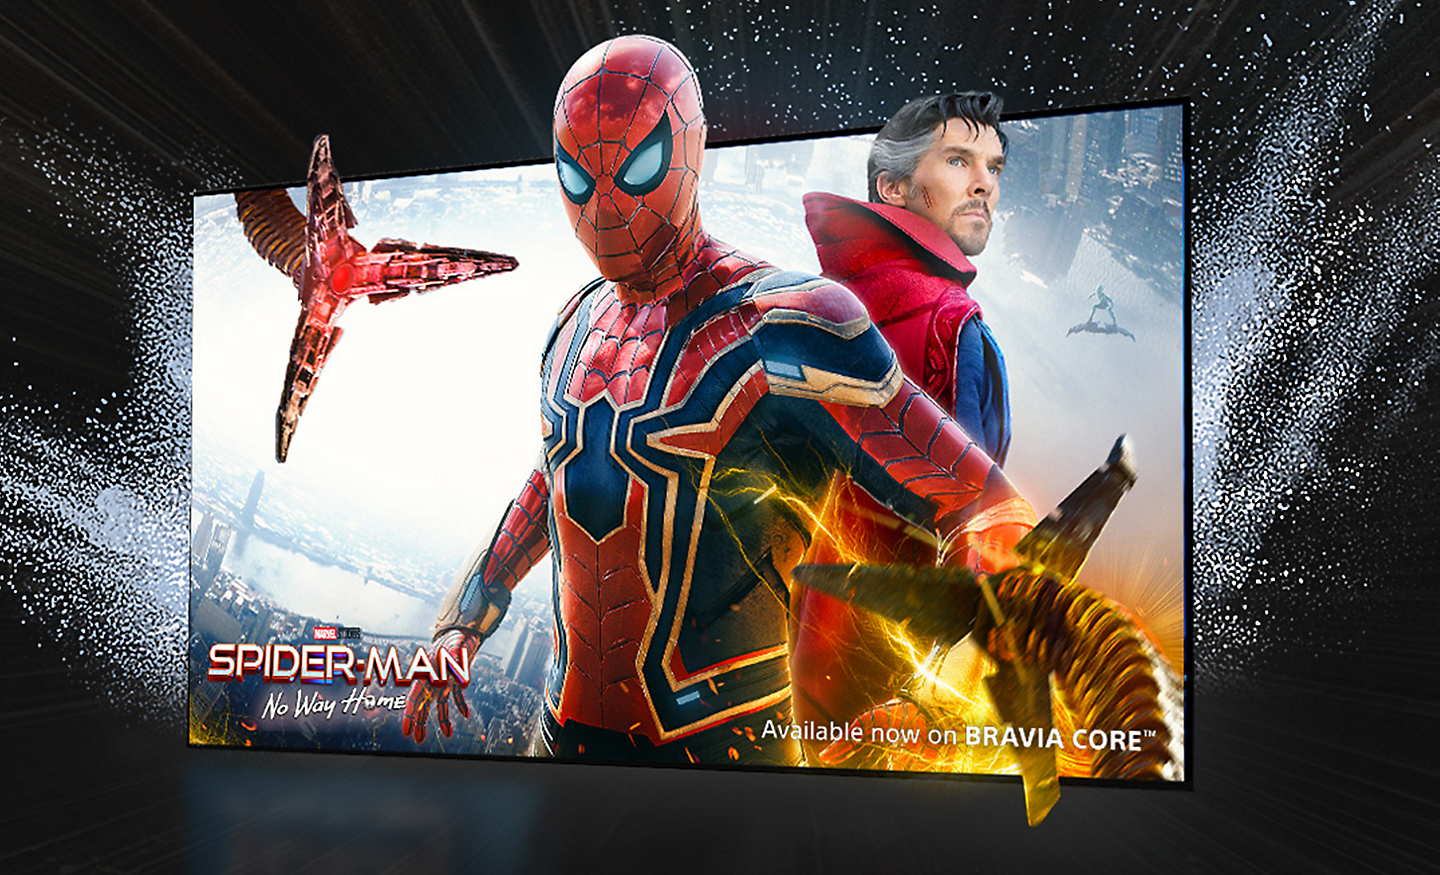 TV screen showing the movie SPIDER-MAN No Way Home with Spider-Man extending out of the screen